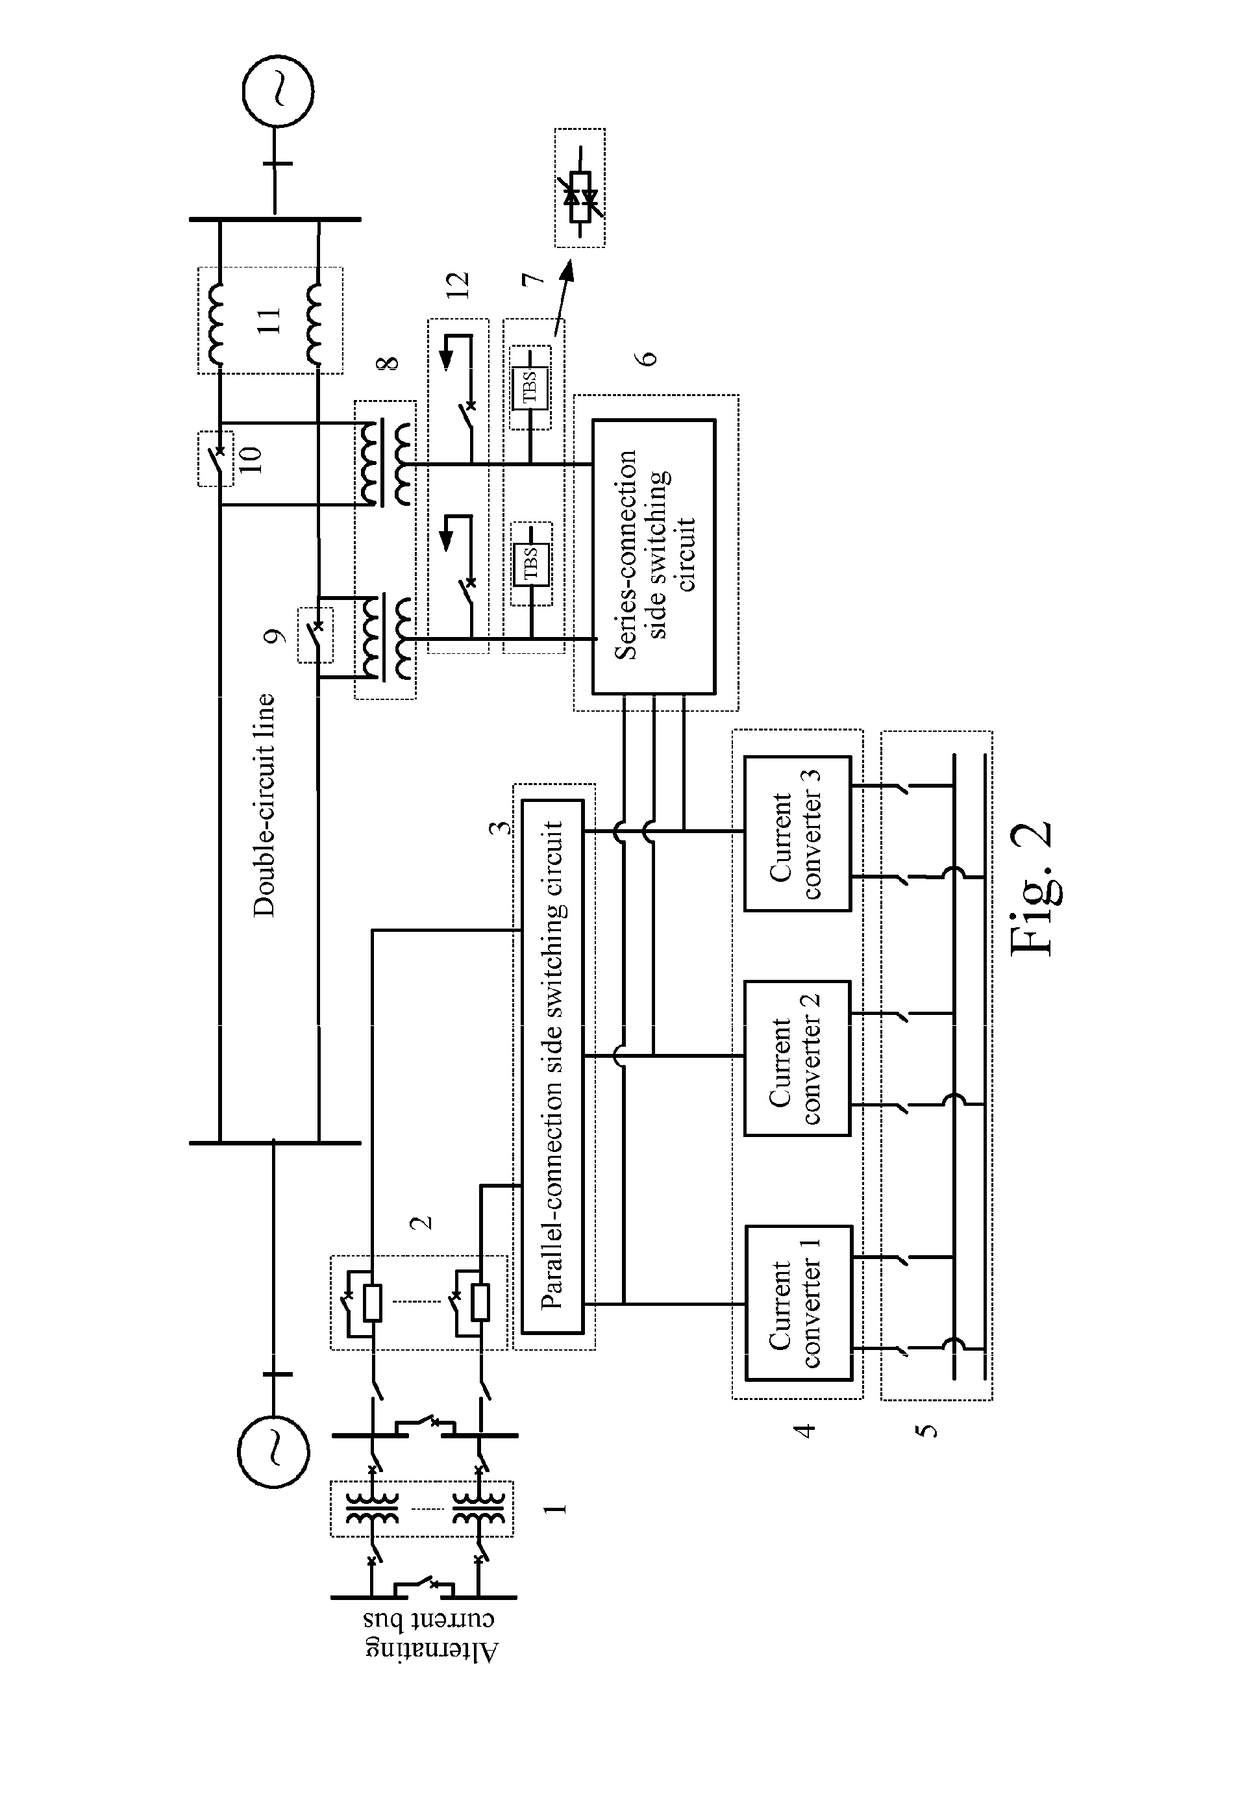 Unified power flow controller for double-circuit line